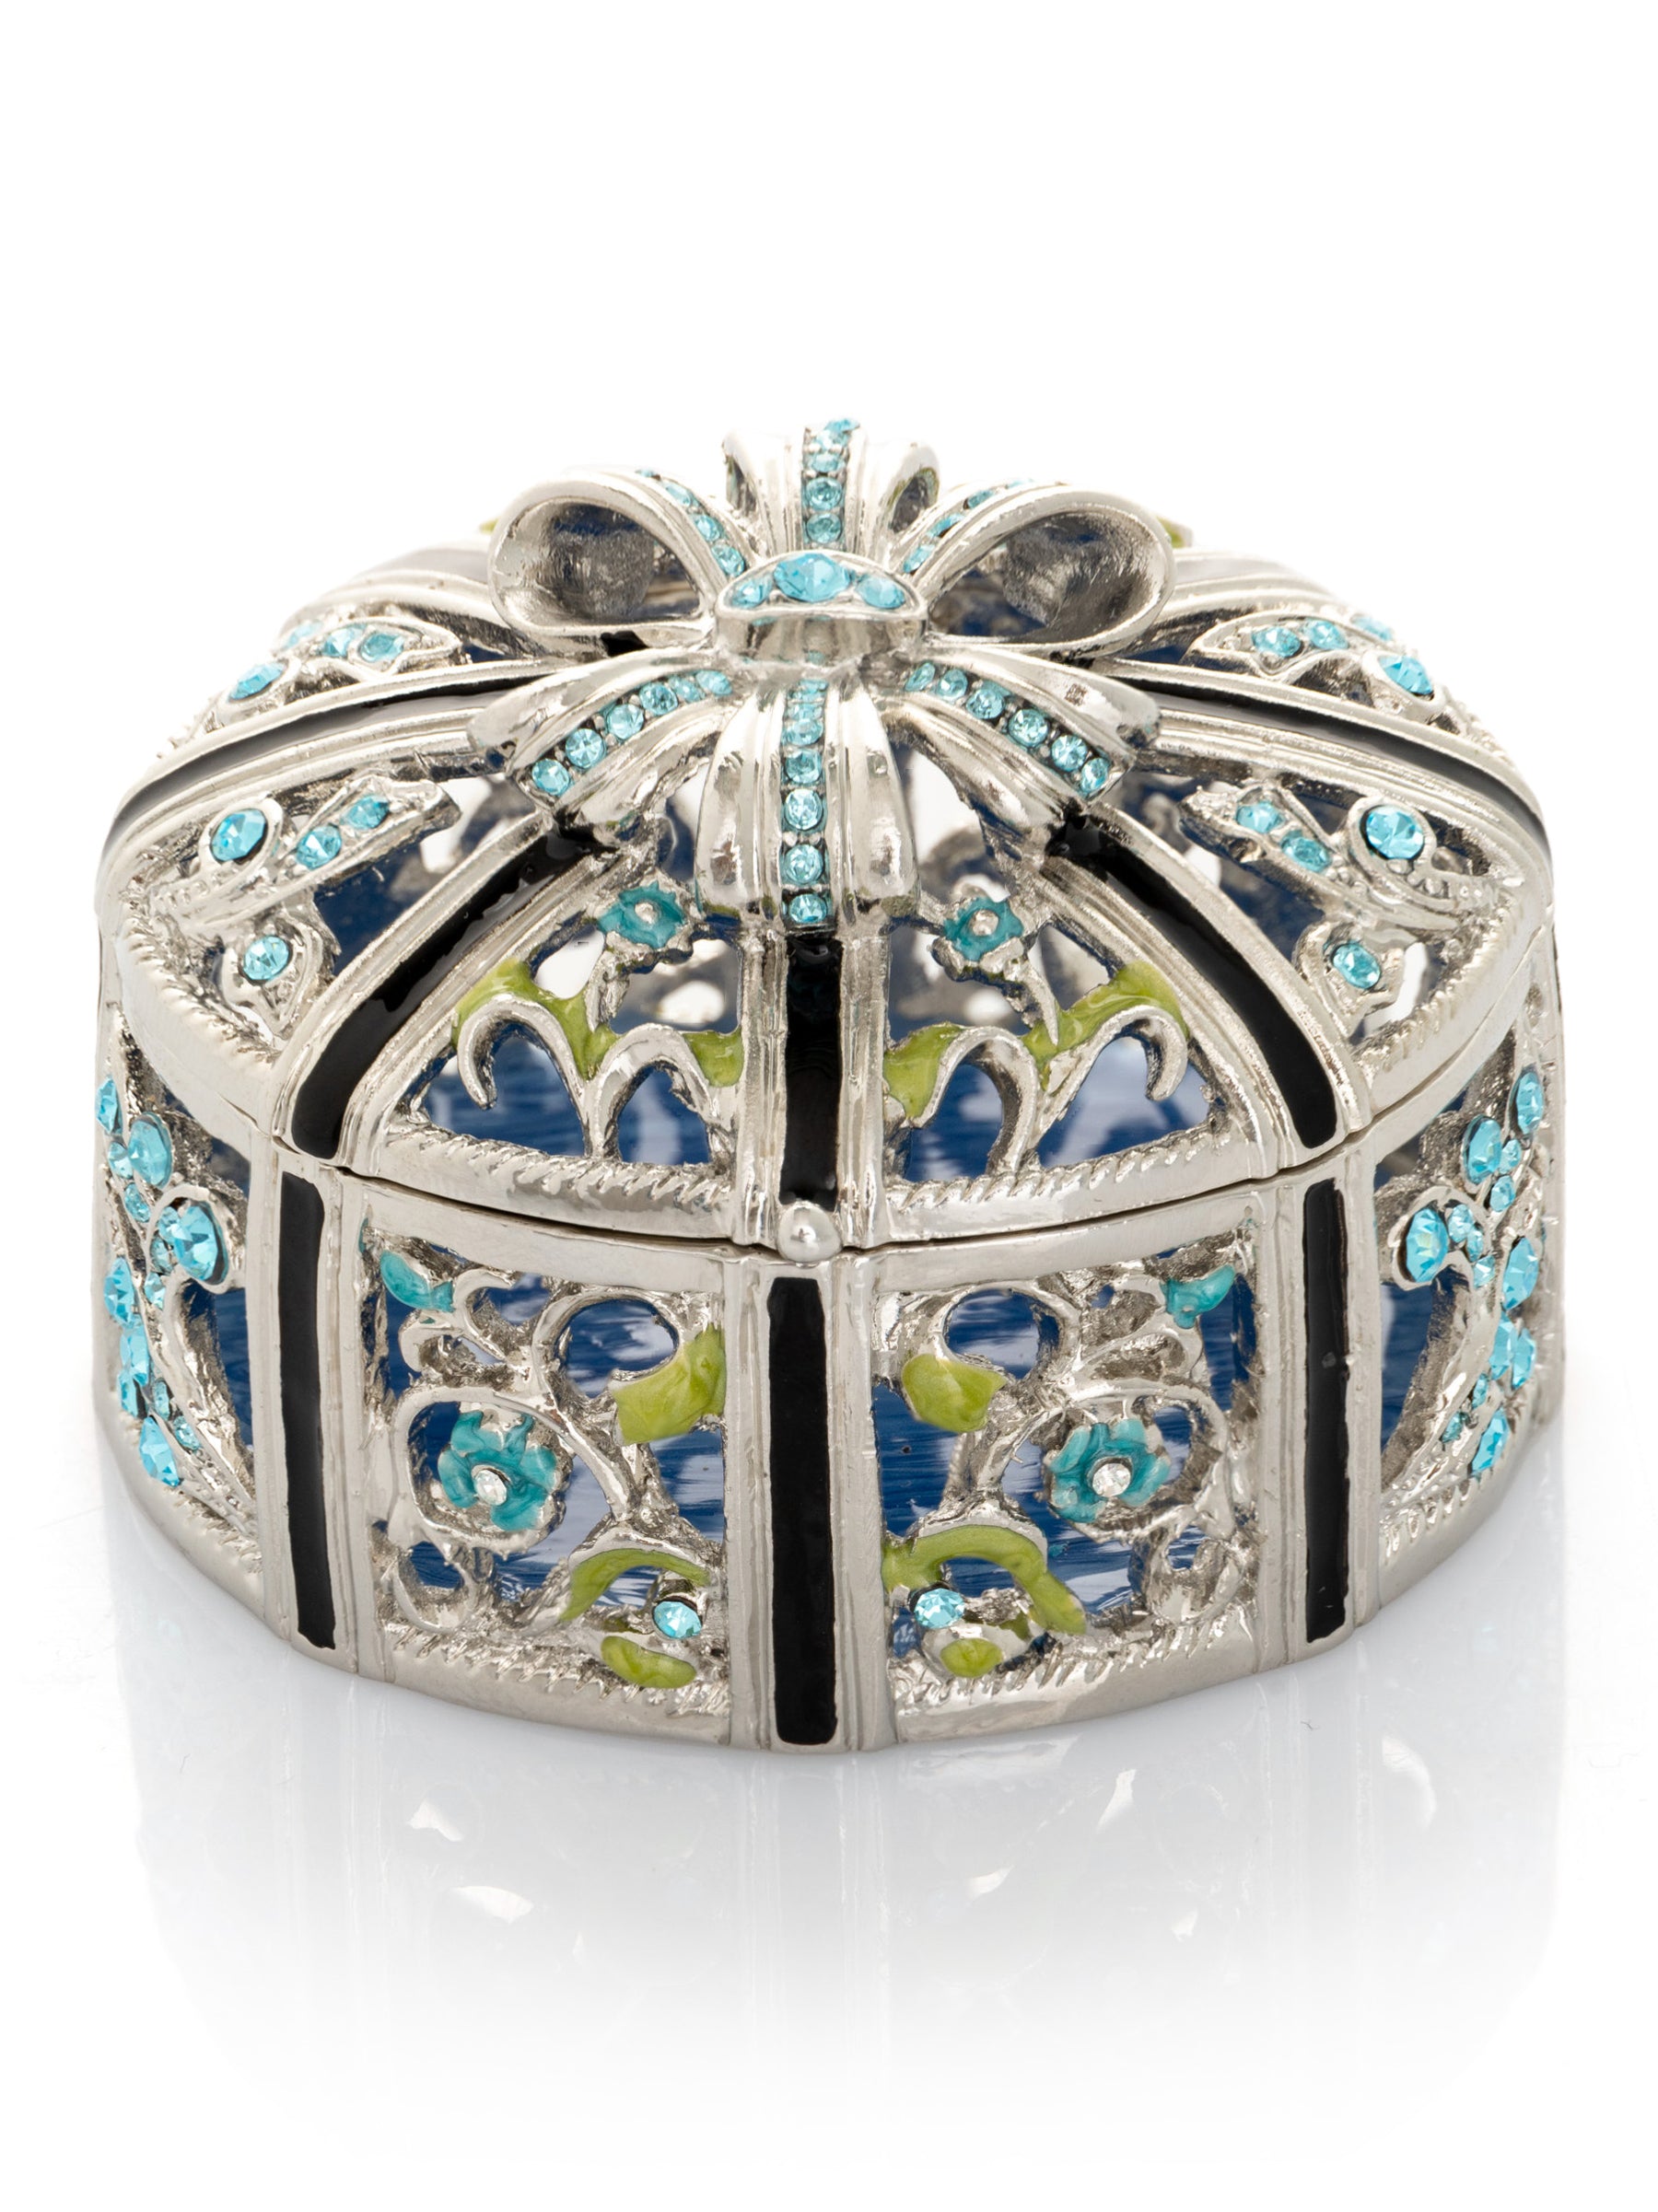 Silver Box with Blue Flowers